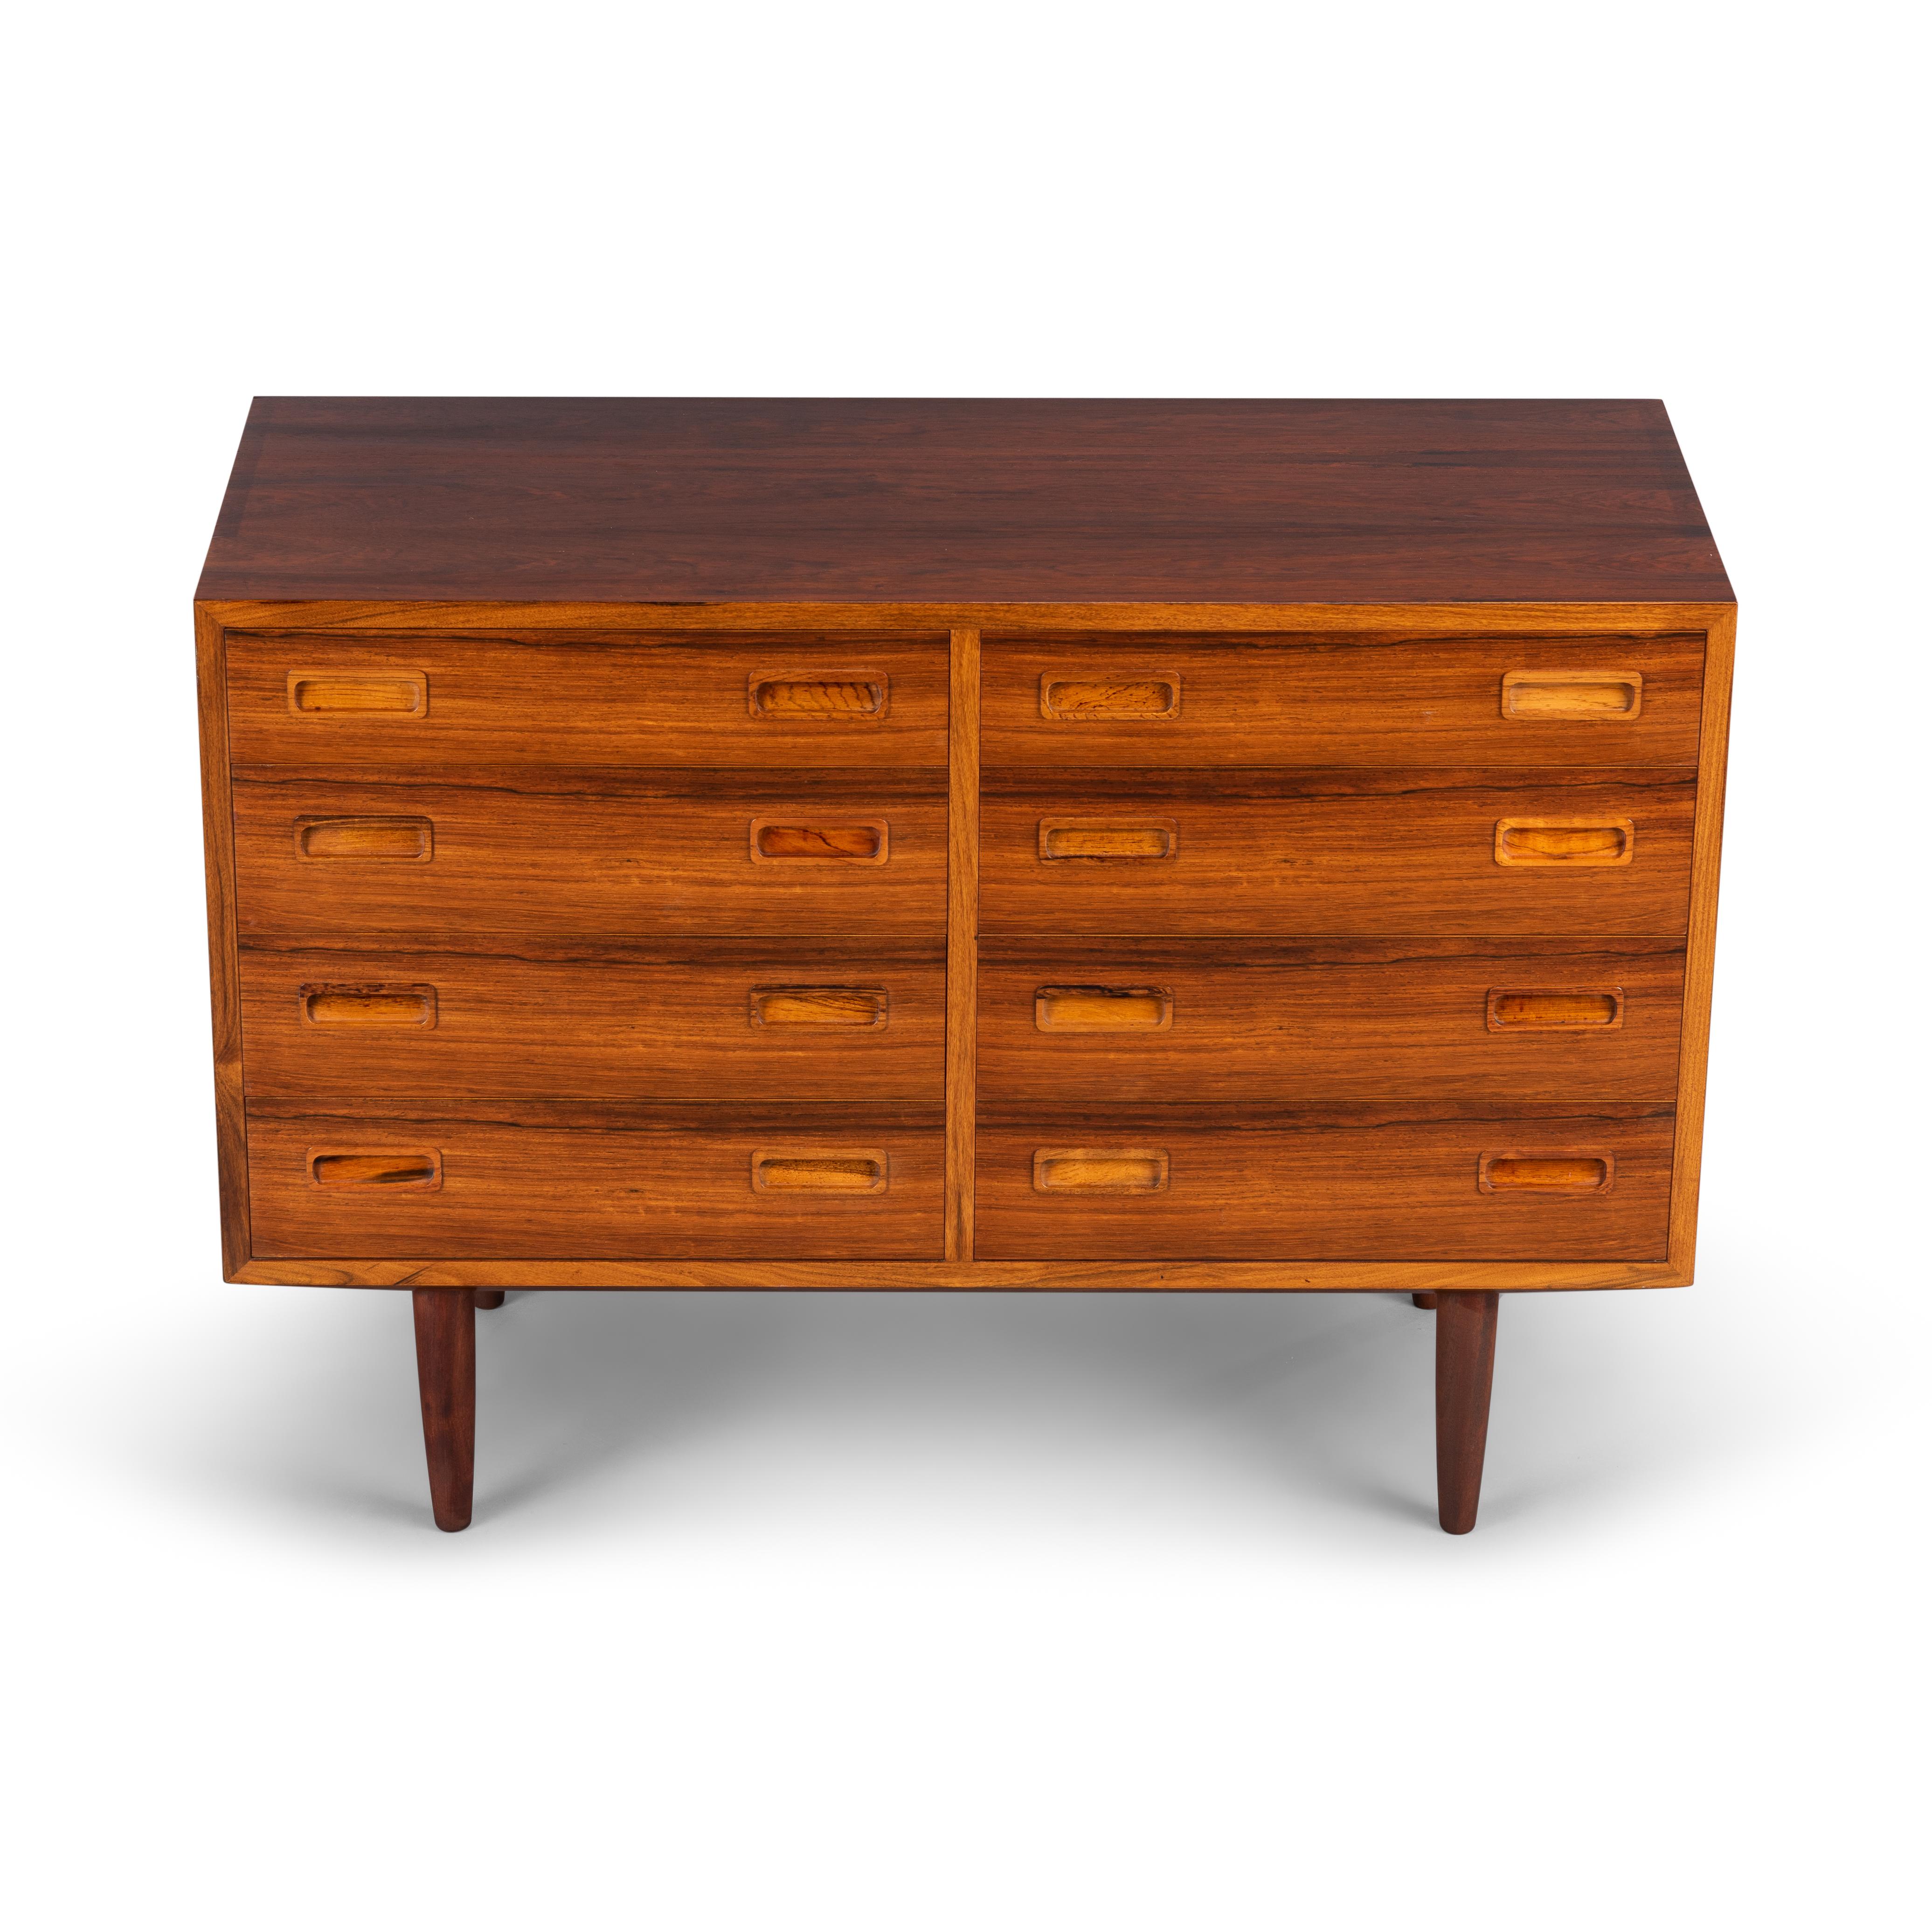 This chest of drawers has Hundevad’s signature all-over it. It is functional, made with great attention for detail and out of carefully selected materials. It is the perfect match between form and function. This chest of drawers was made in the